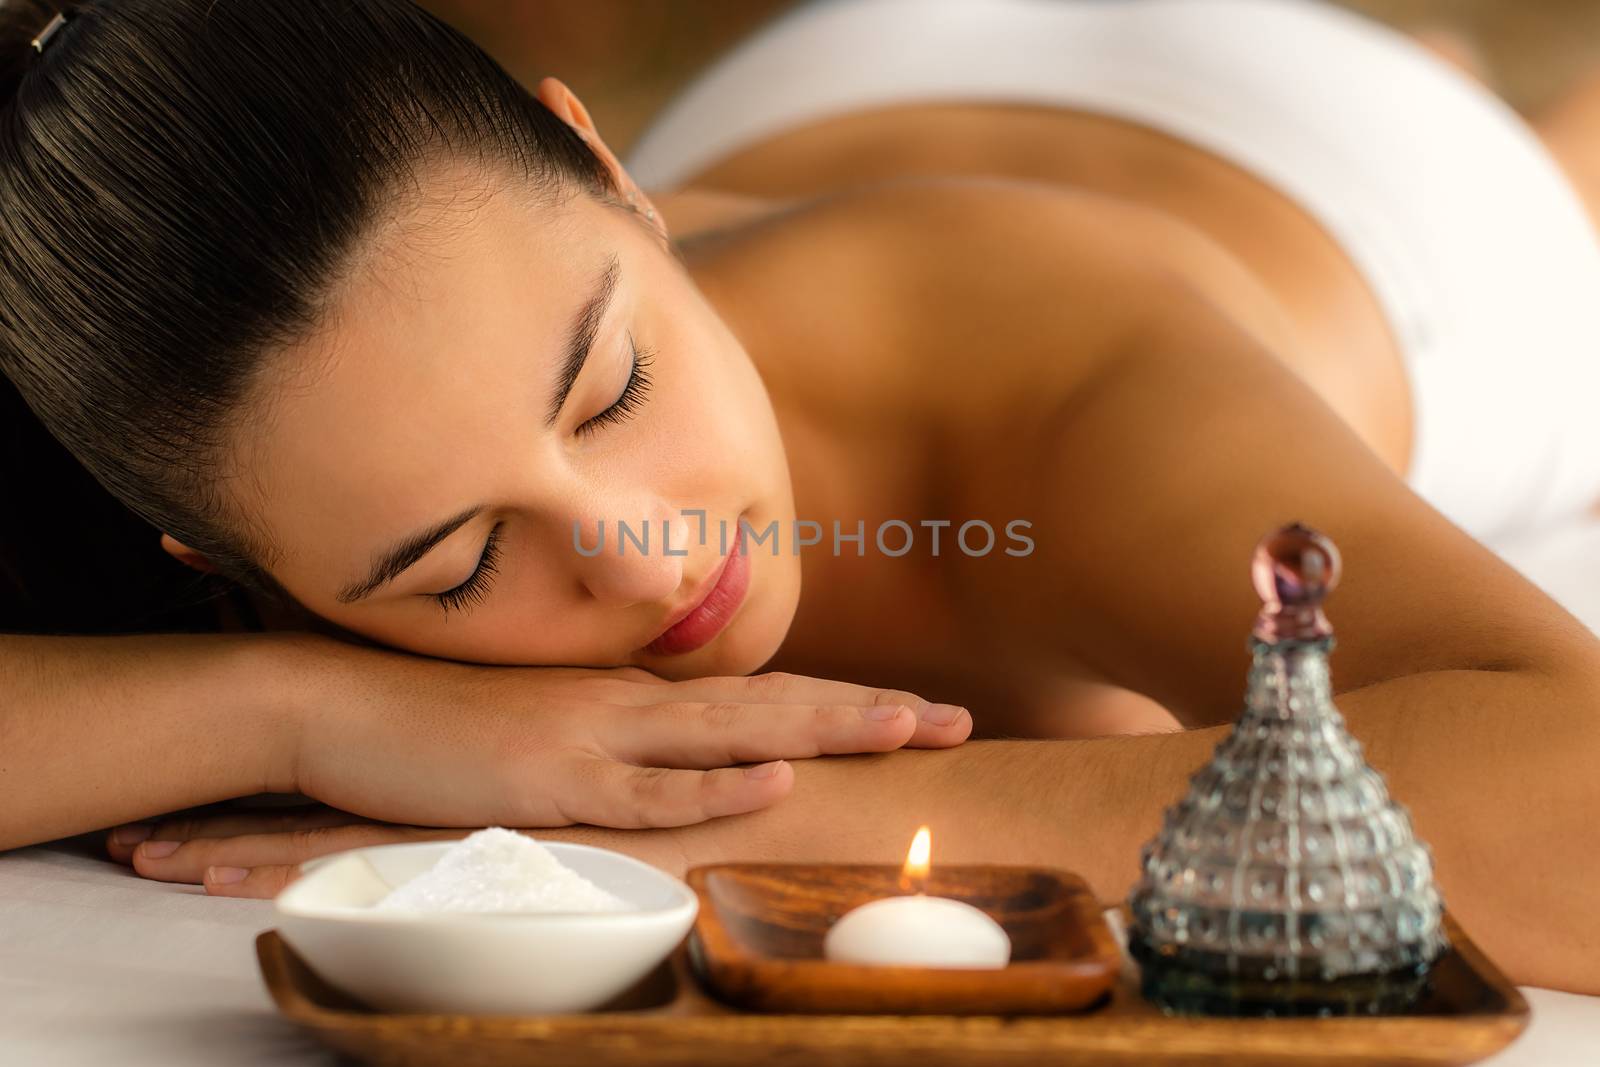 Low candle light portrait of woman relaxing in spa next to massage oil and beauty product.